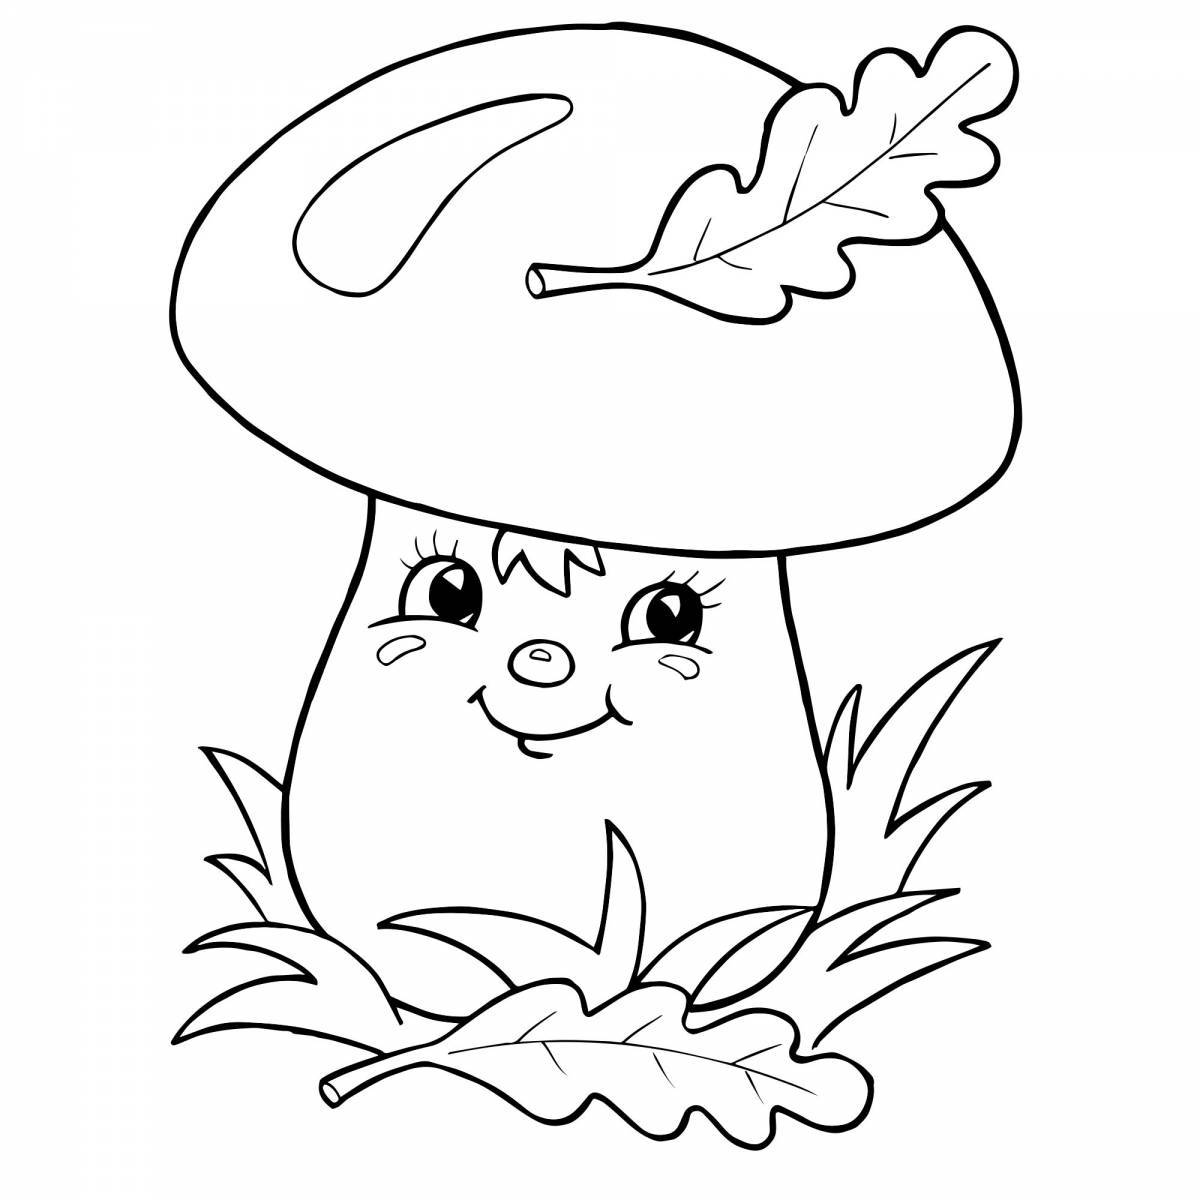 Shiny mushroom coloring pages